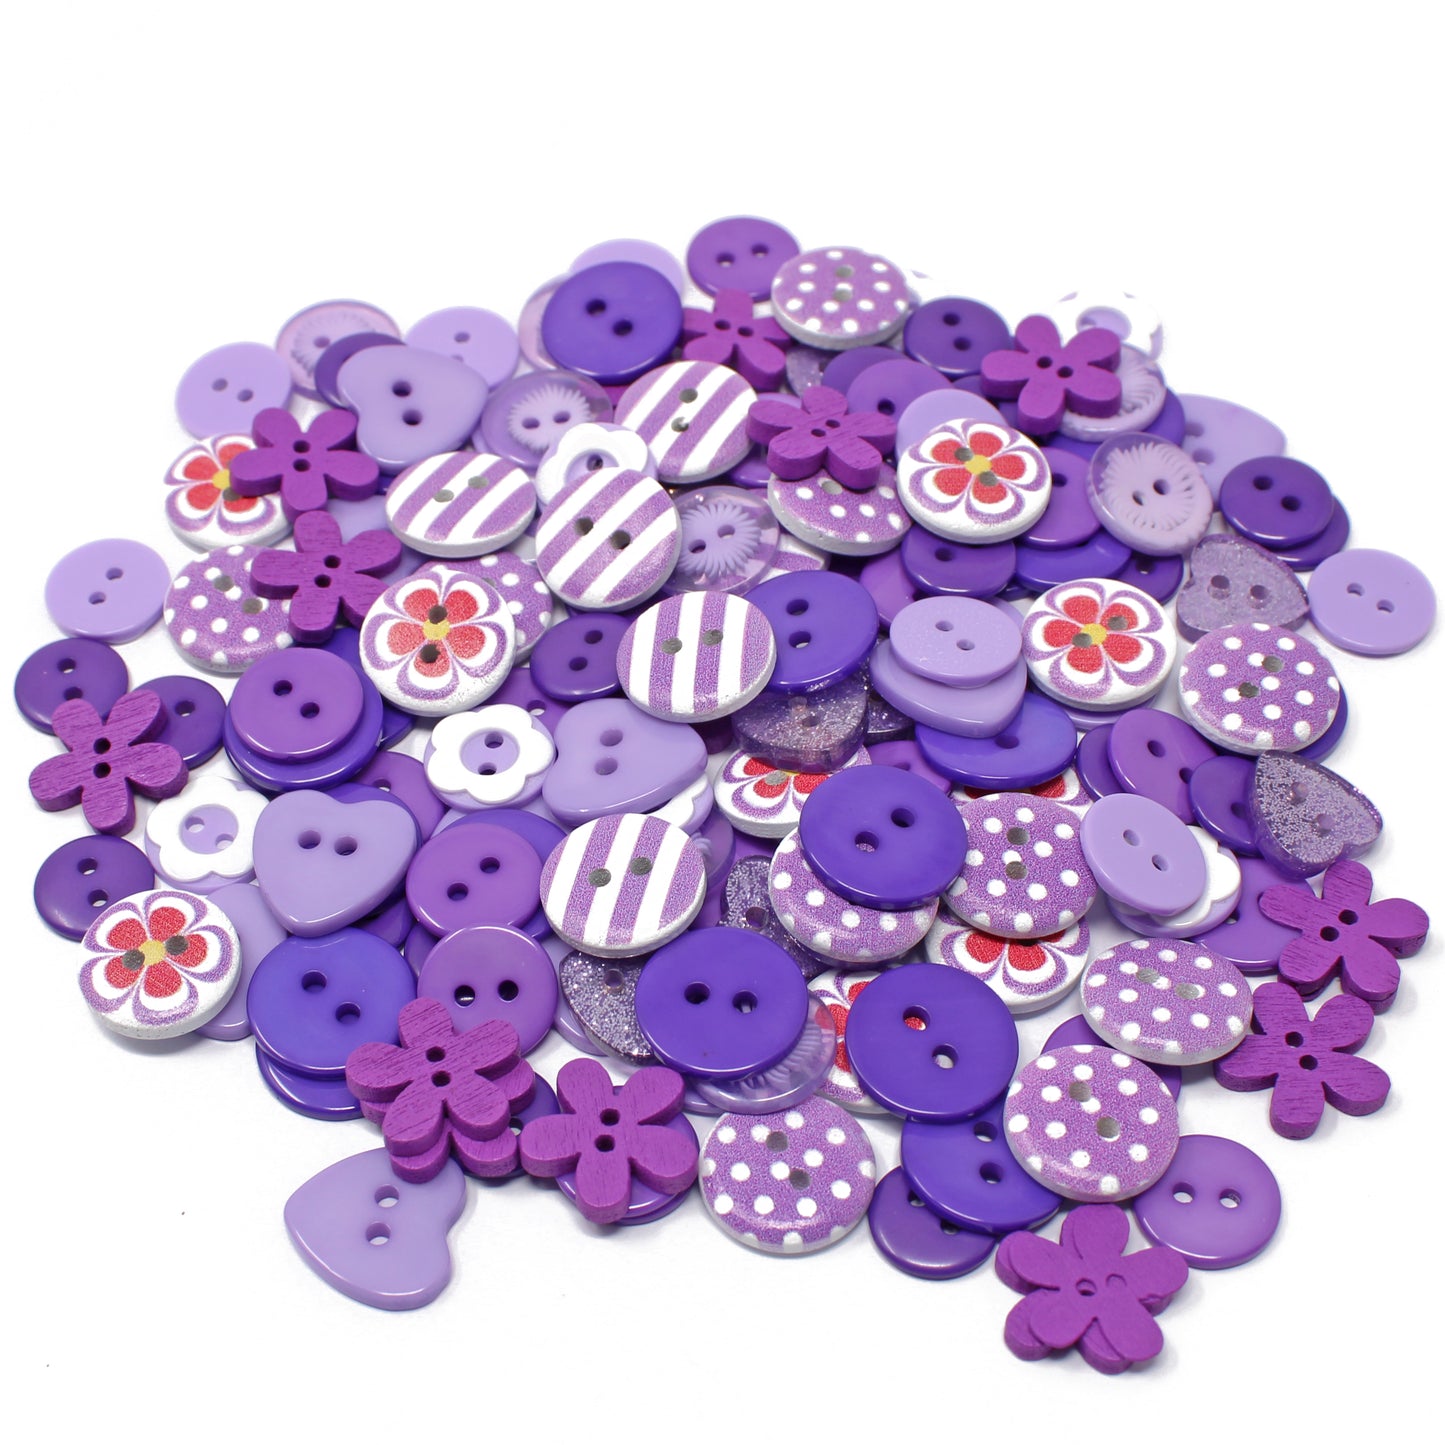 Purple 150 Mix Wood Acrylic & Resin Buttons